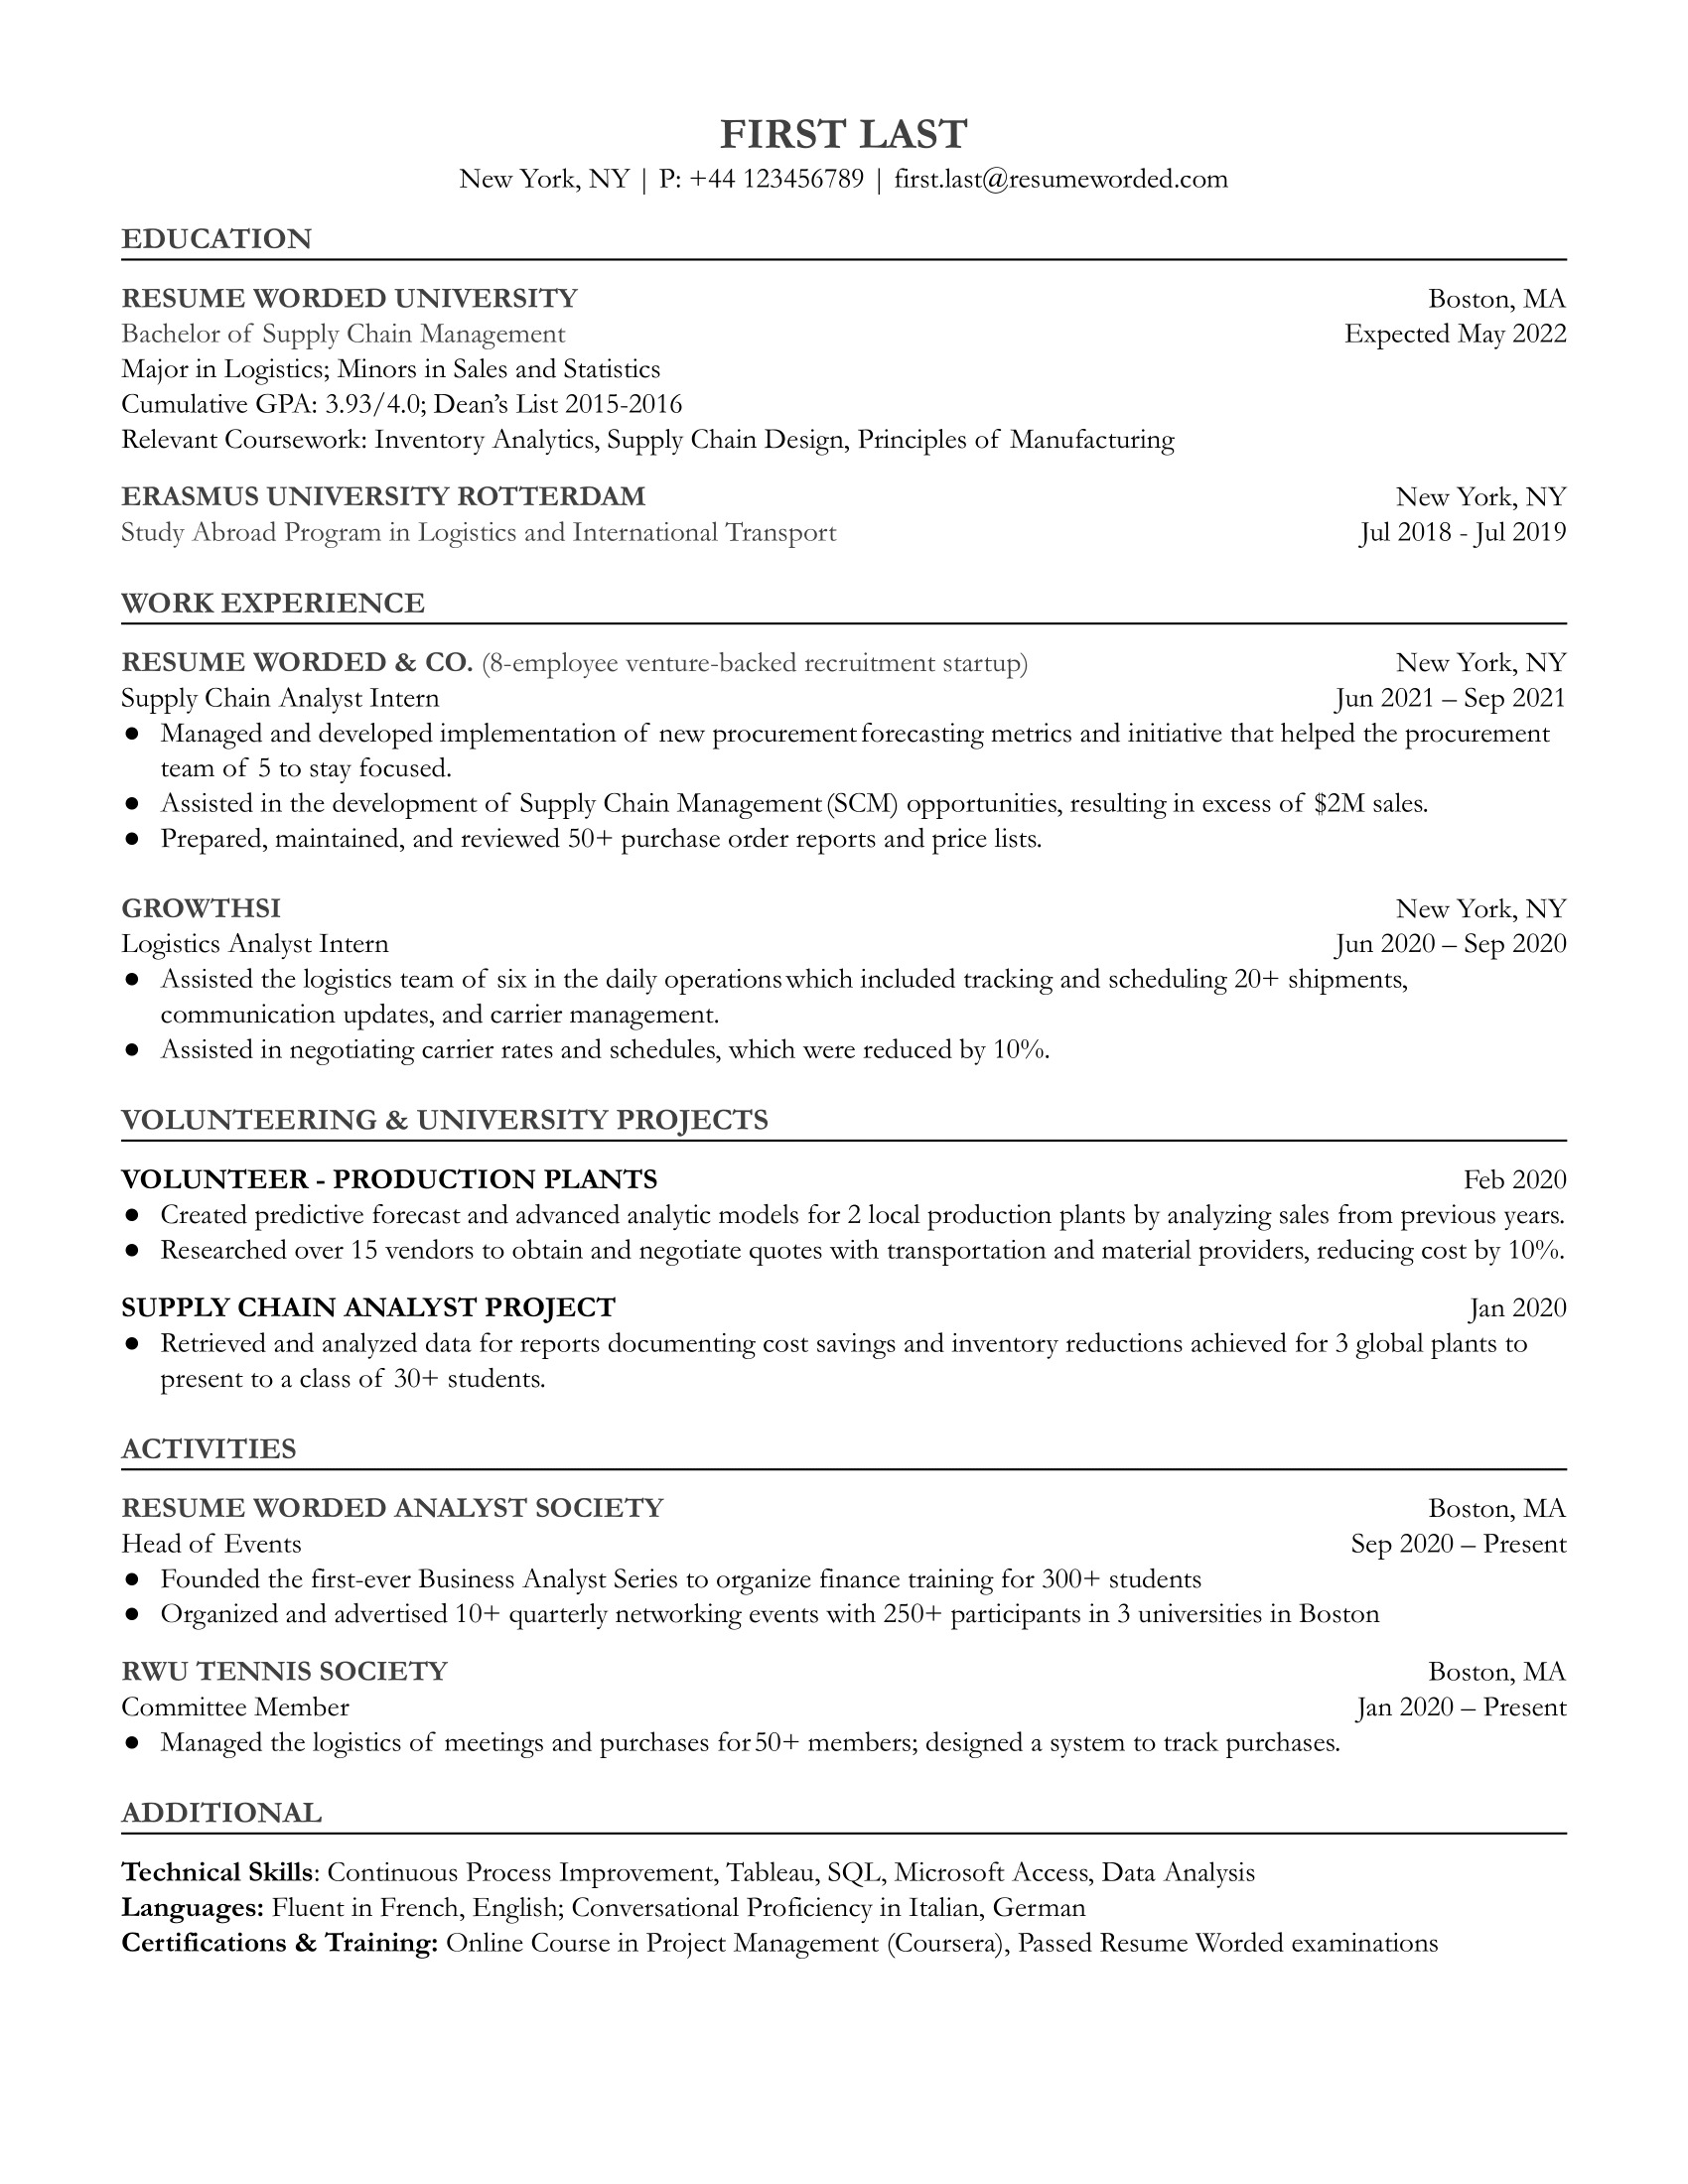 An effective CV for an entry level supply chain analyst position featuring quantified achievements and software proficiency.